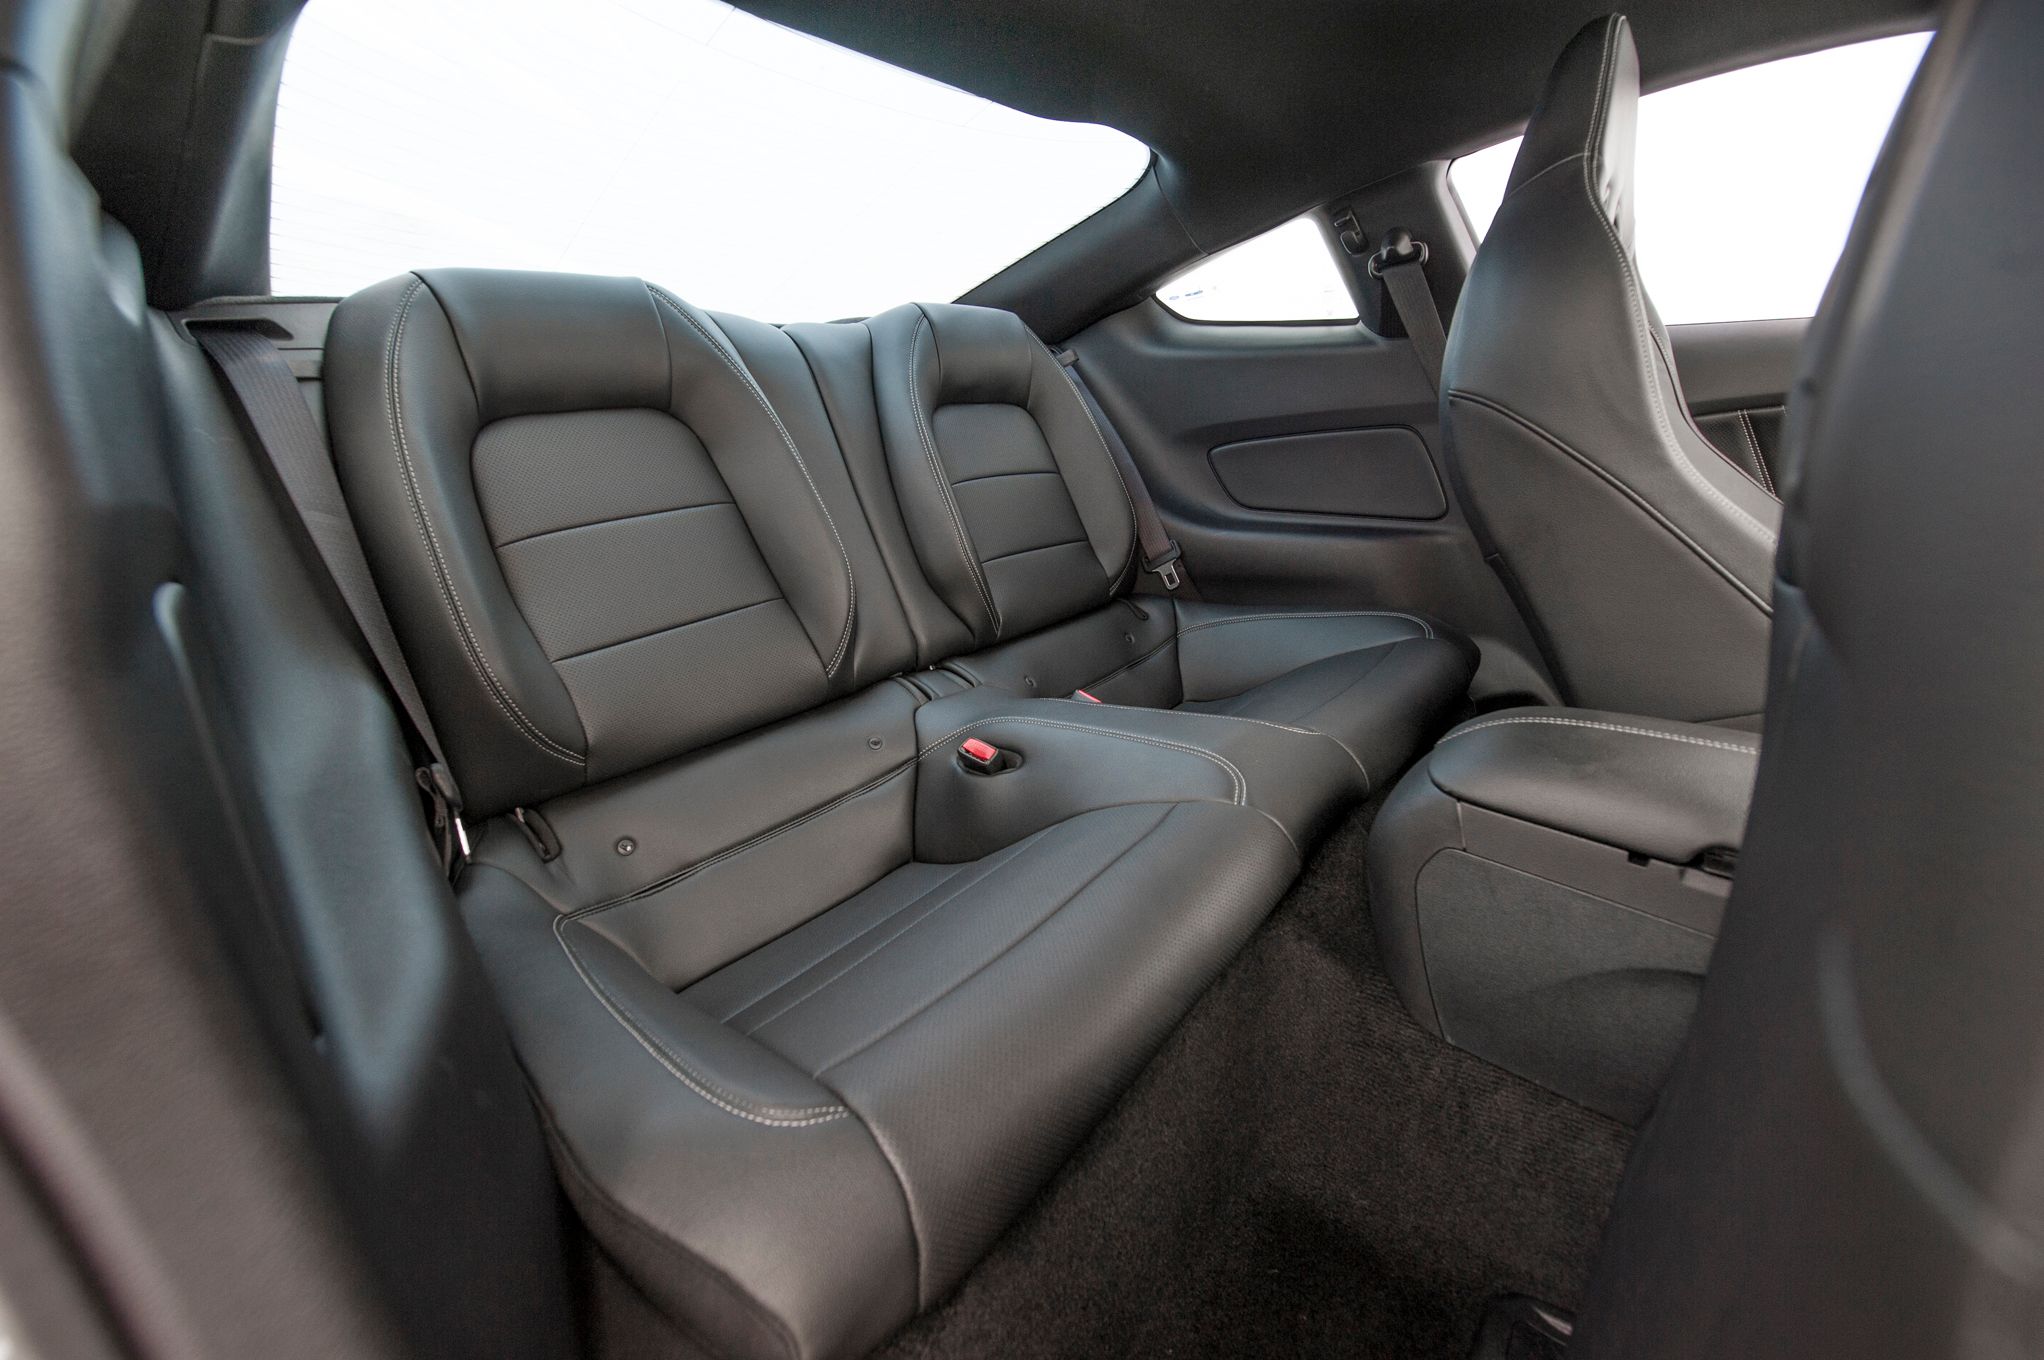 2015 Ford Mustang Gt Rear Seats Interior (View 2 of 30)